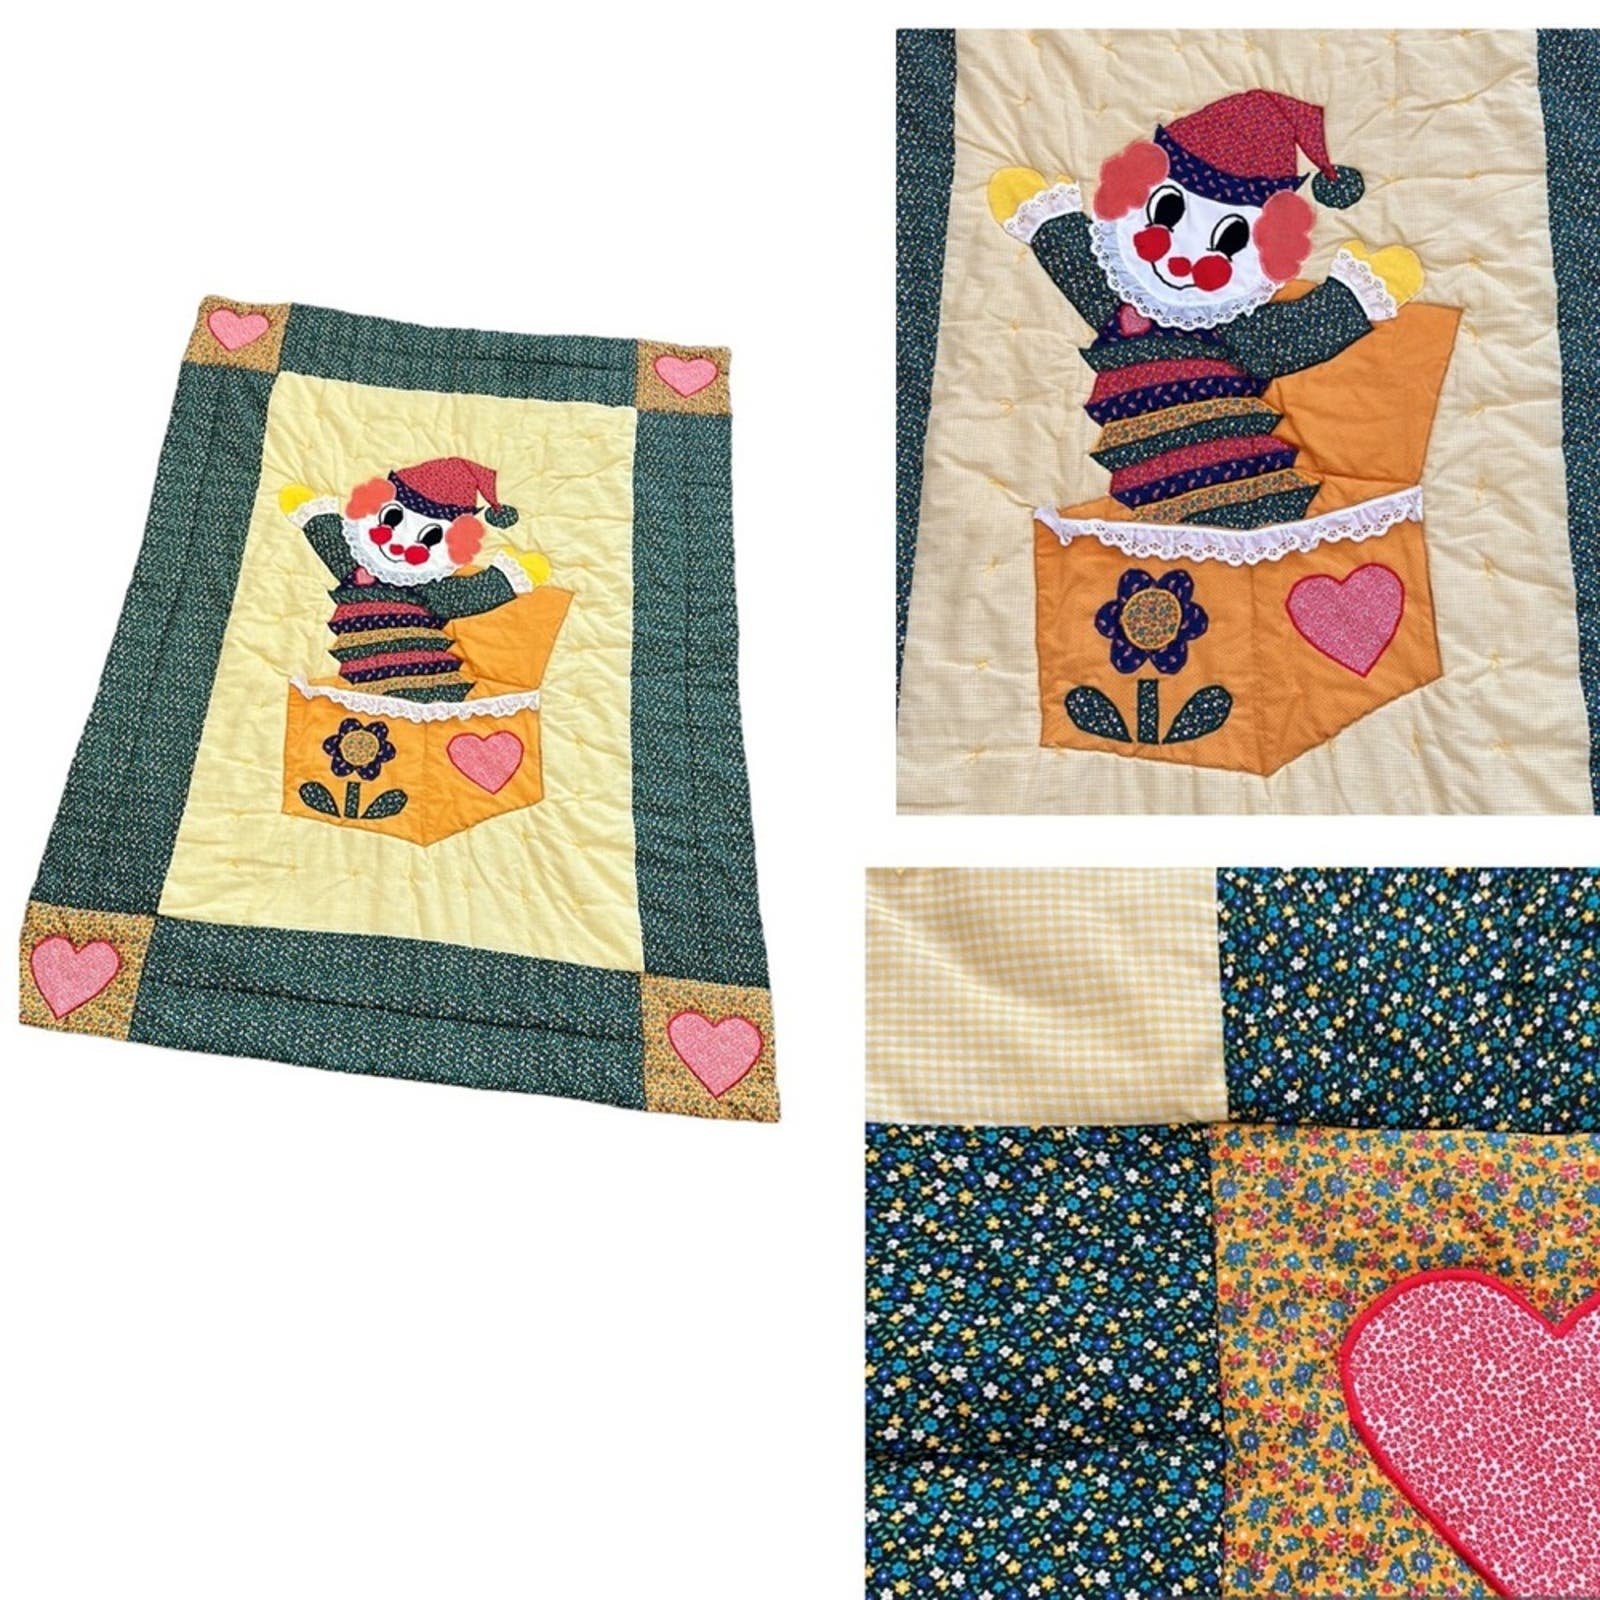 Vintage 70s/80s Handmade Quilt Baby Blanket Jack in the Box Patchwork 43”x57” e6oYr0km3